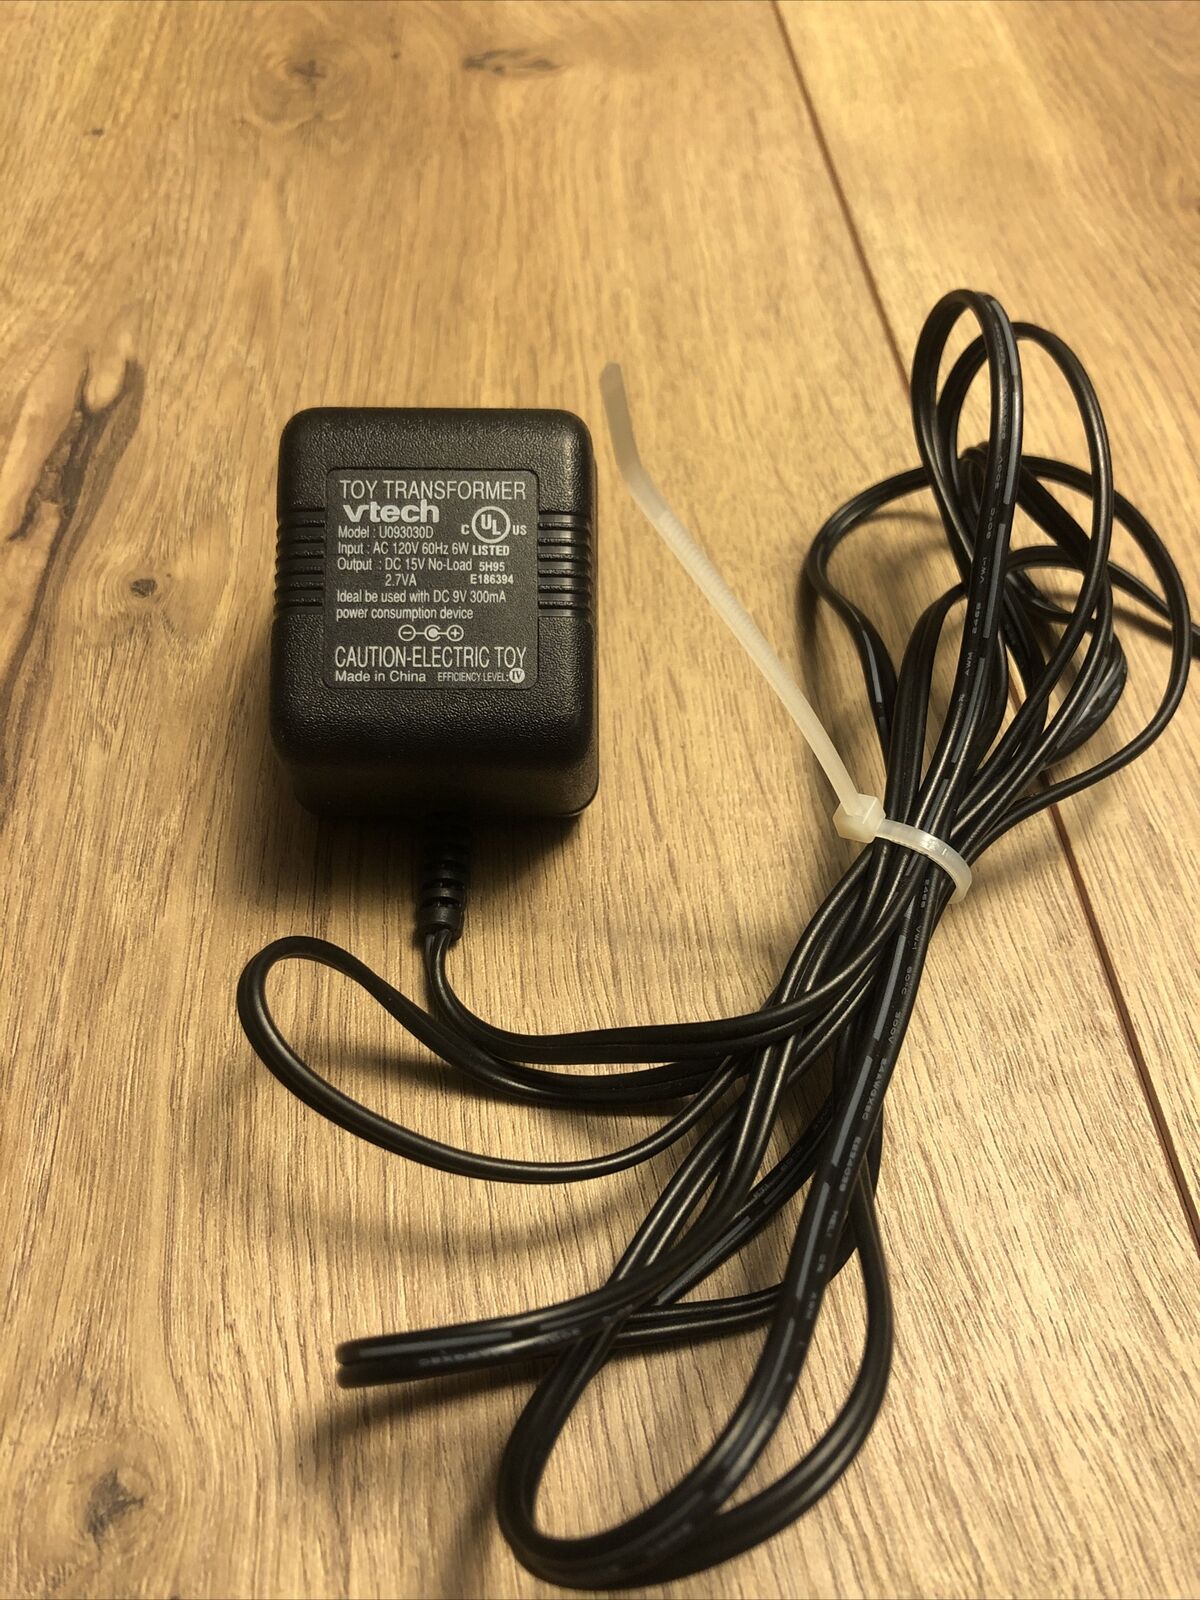 VTECH TOY TRANSFORMER U093030D AC ADAPTER OUTPUT15V DC CORD CHARGER Brand: VTech Type: AC to DC